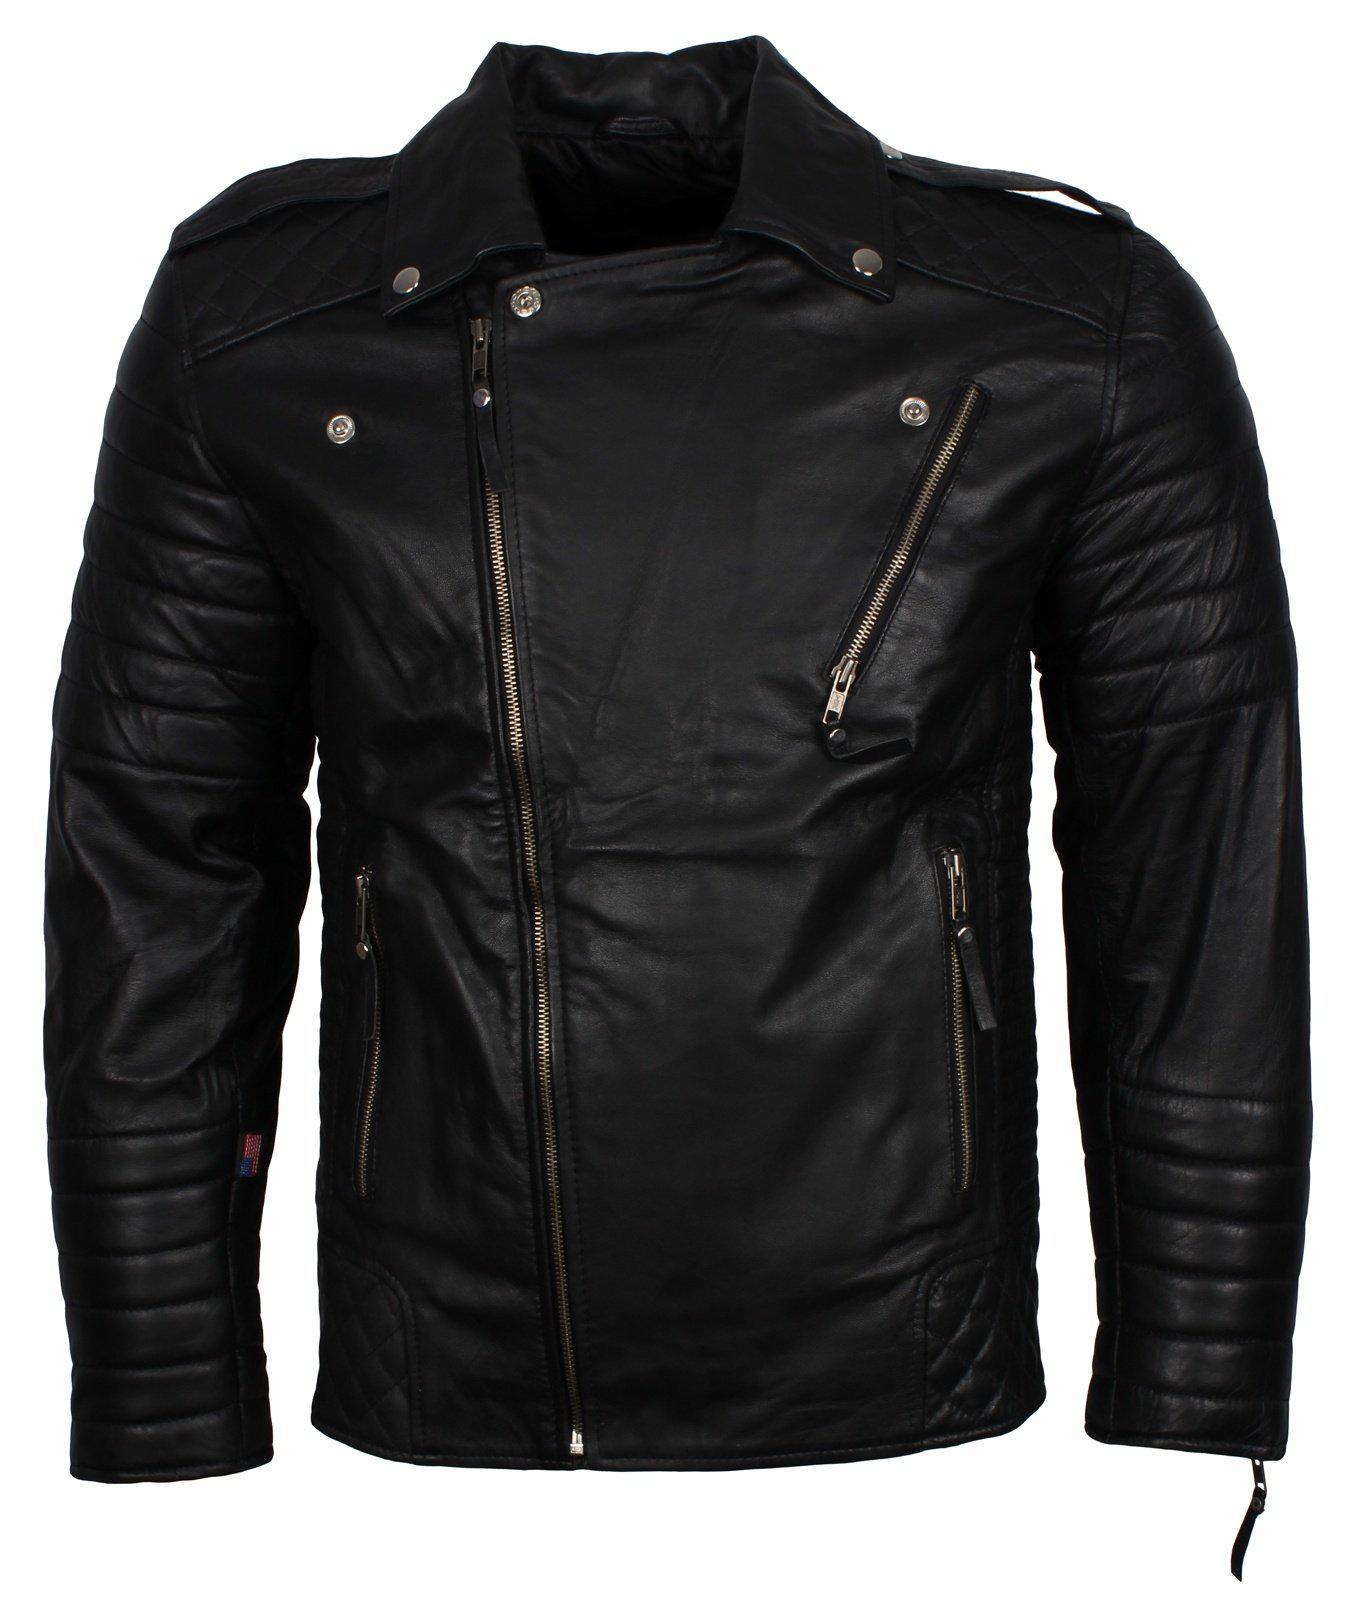 Padded Black Leather Jacket for Motorcycle Enthusiast